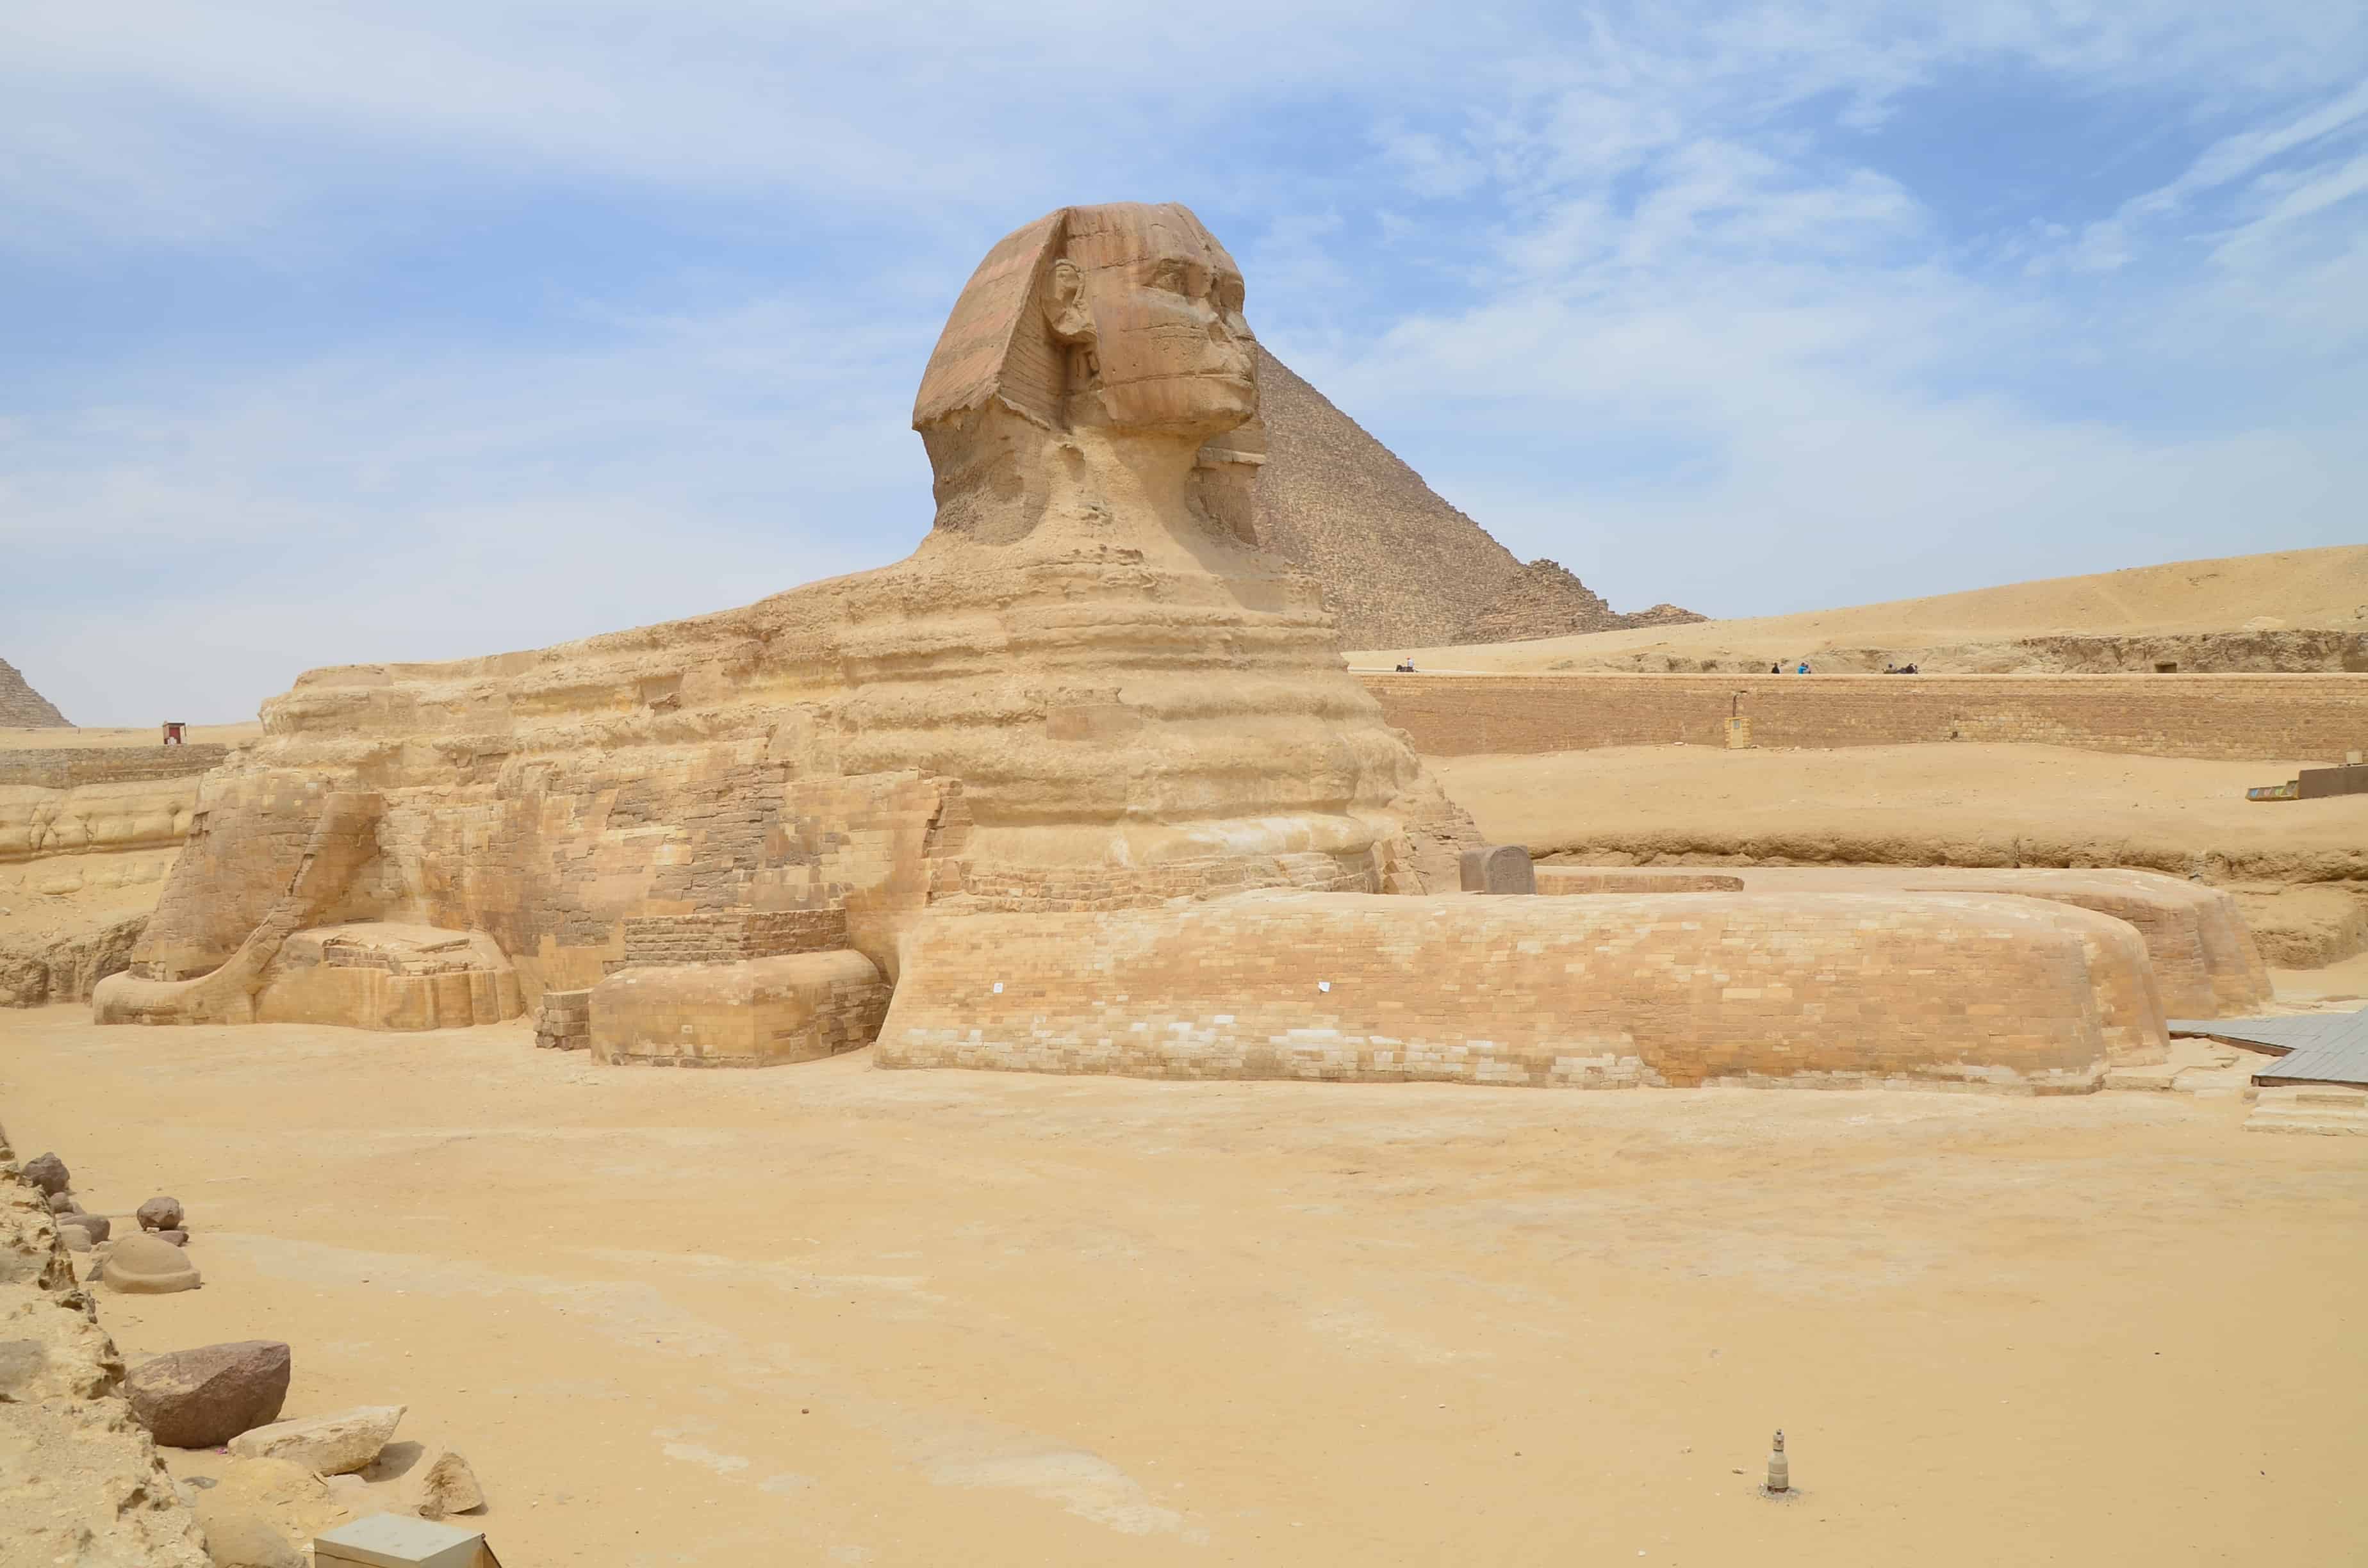 Sphinx at the Pyramids of Giza in Egypt